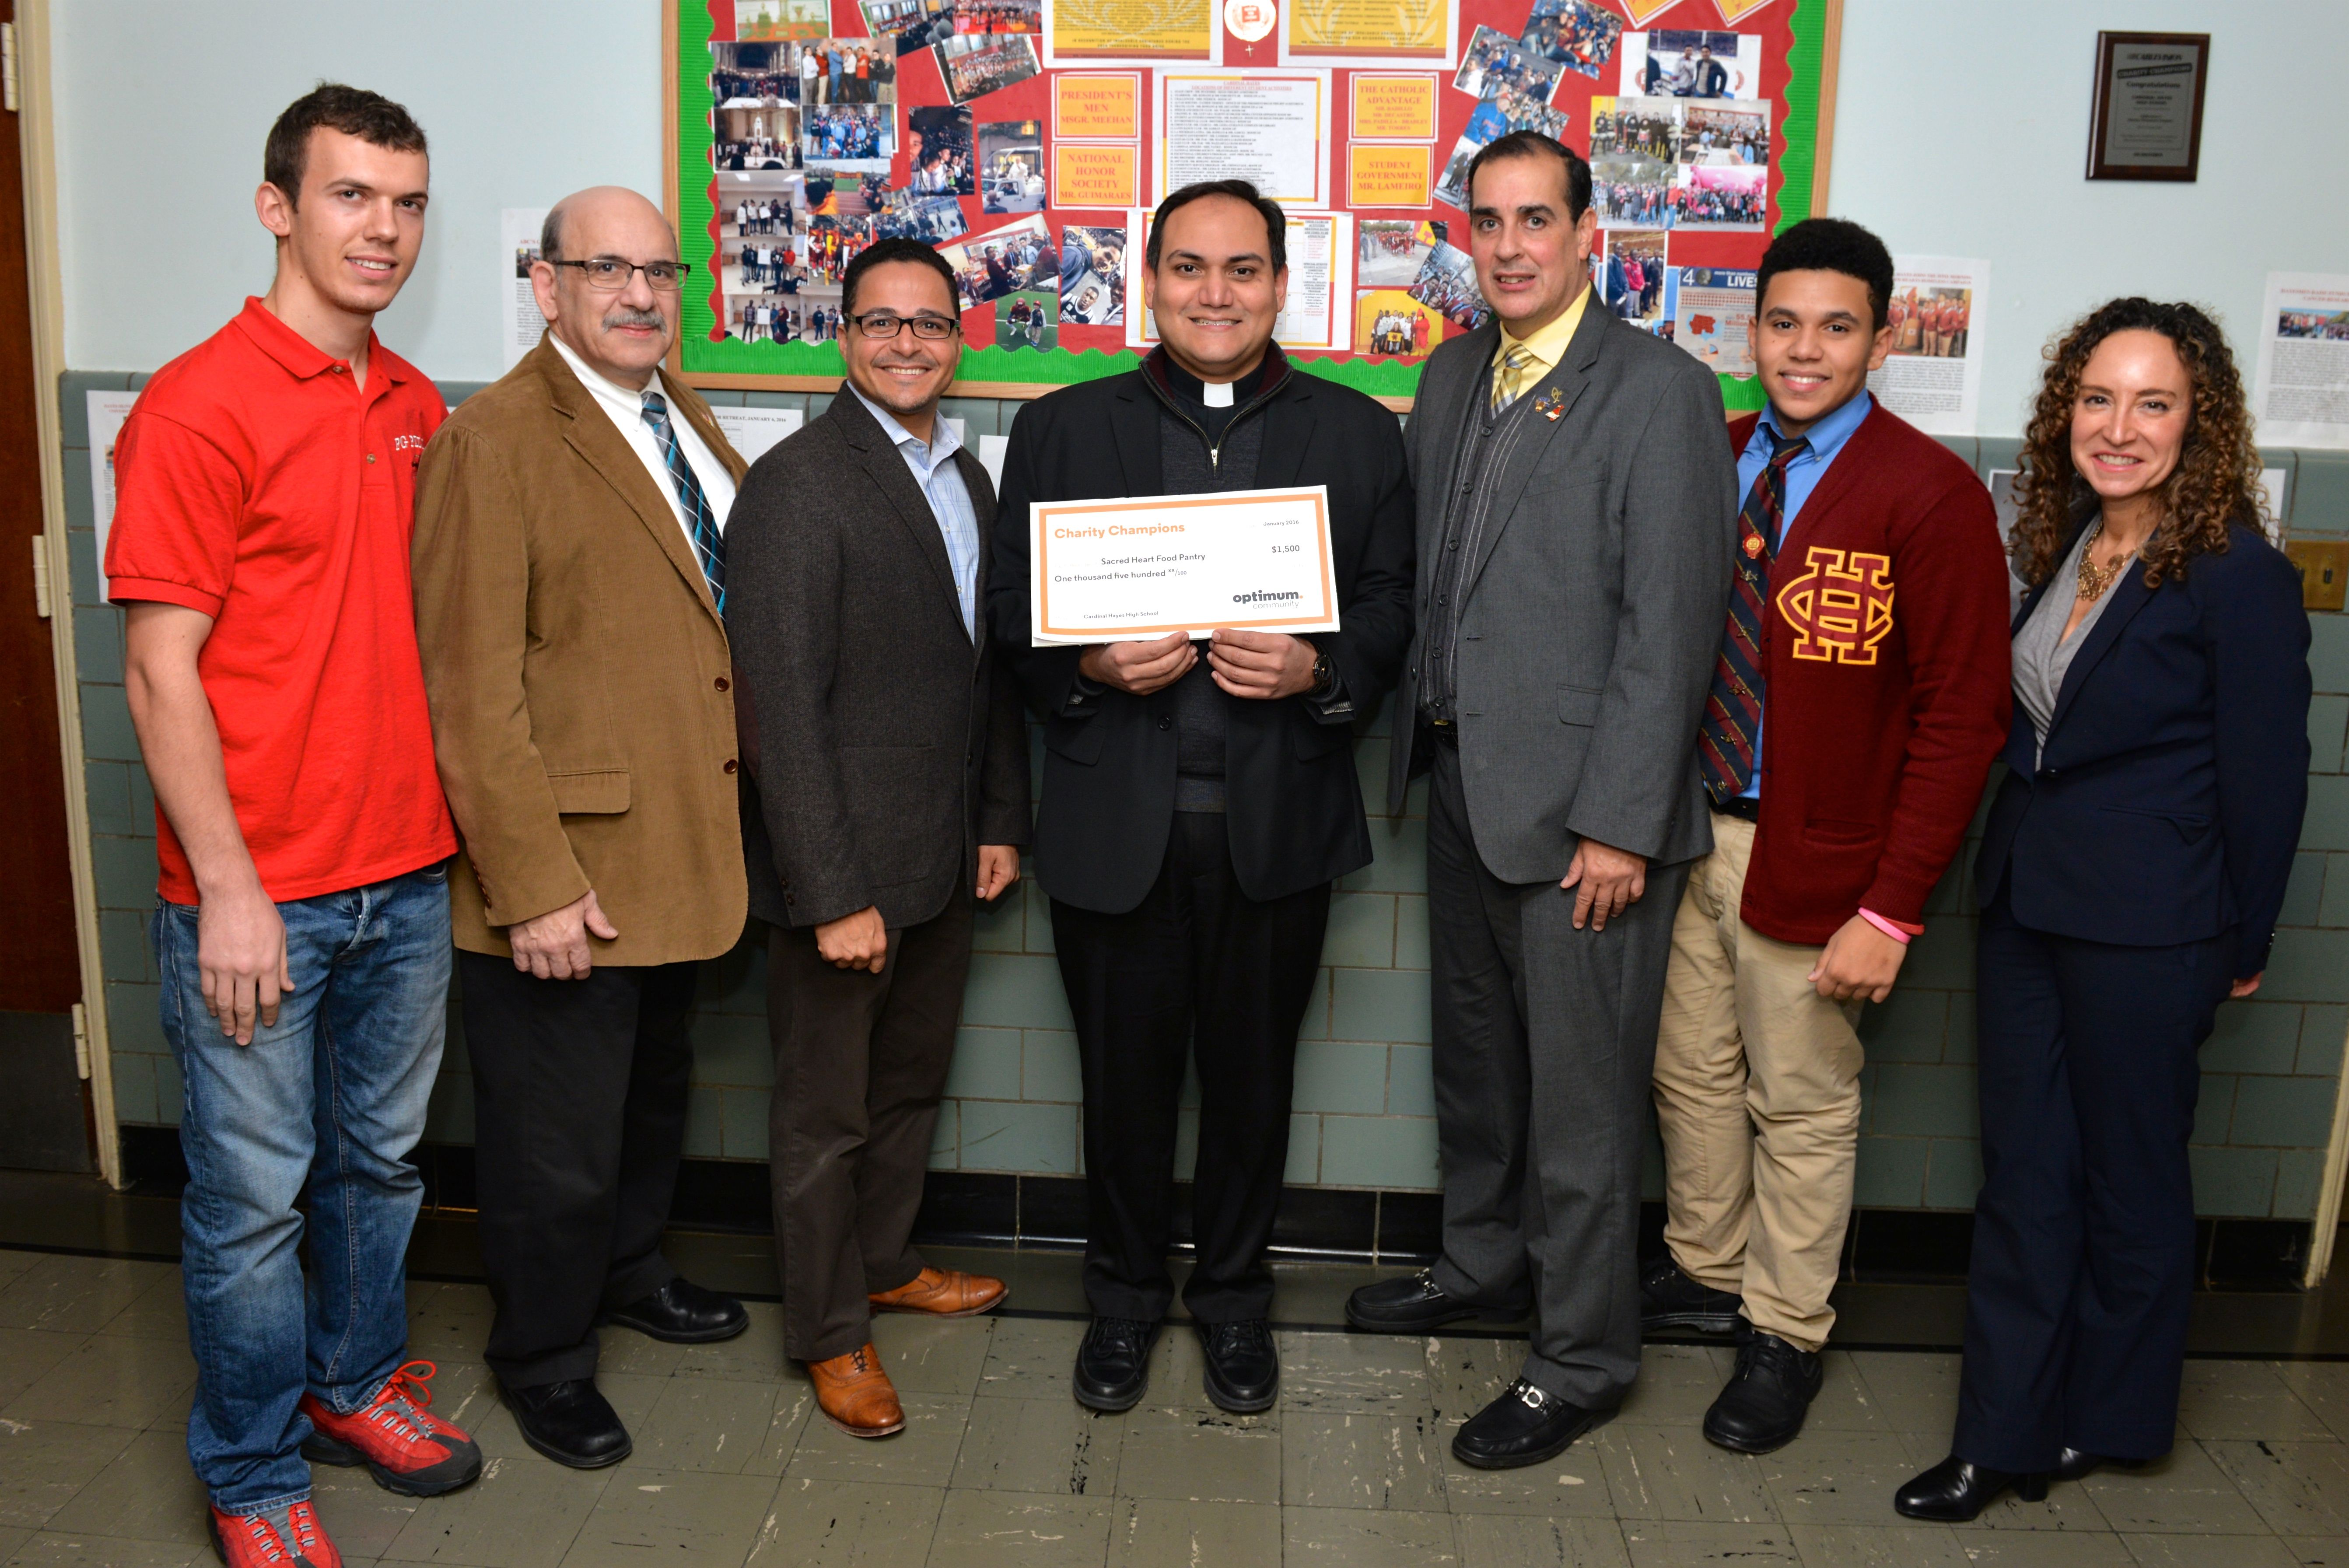 Students at Cardinal Hayes HS Participate in Optimum Community’s 7th